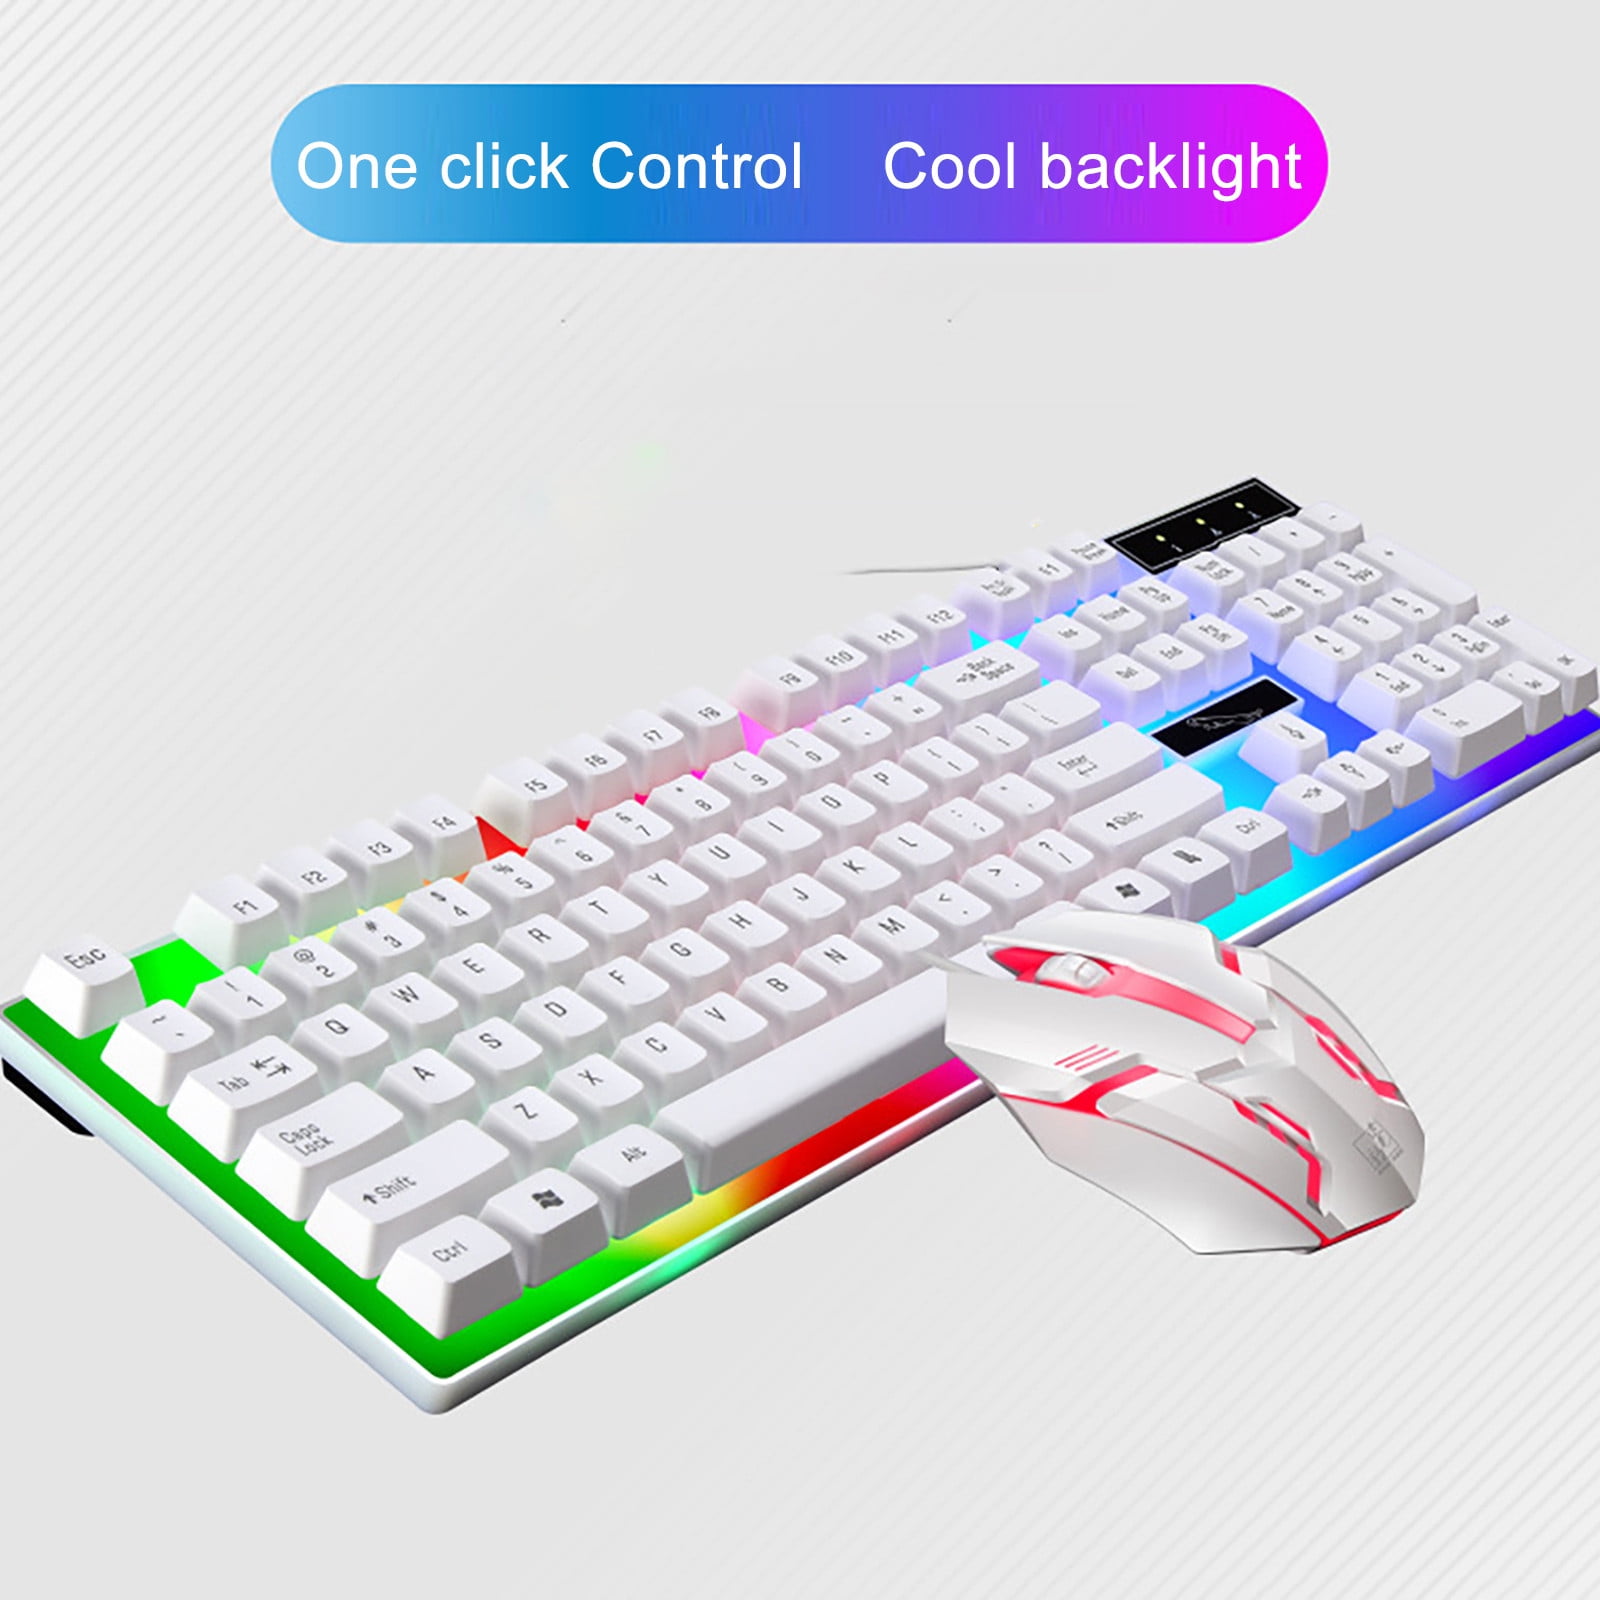 New Colorful Illuminated Backlit USB Wired Pro Gaming keyboard and Mouse set 